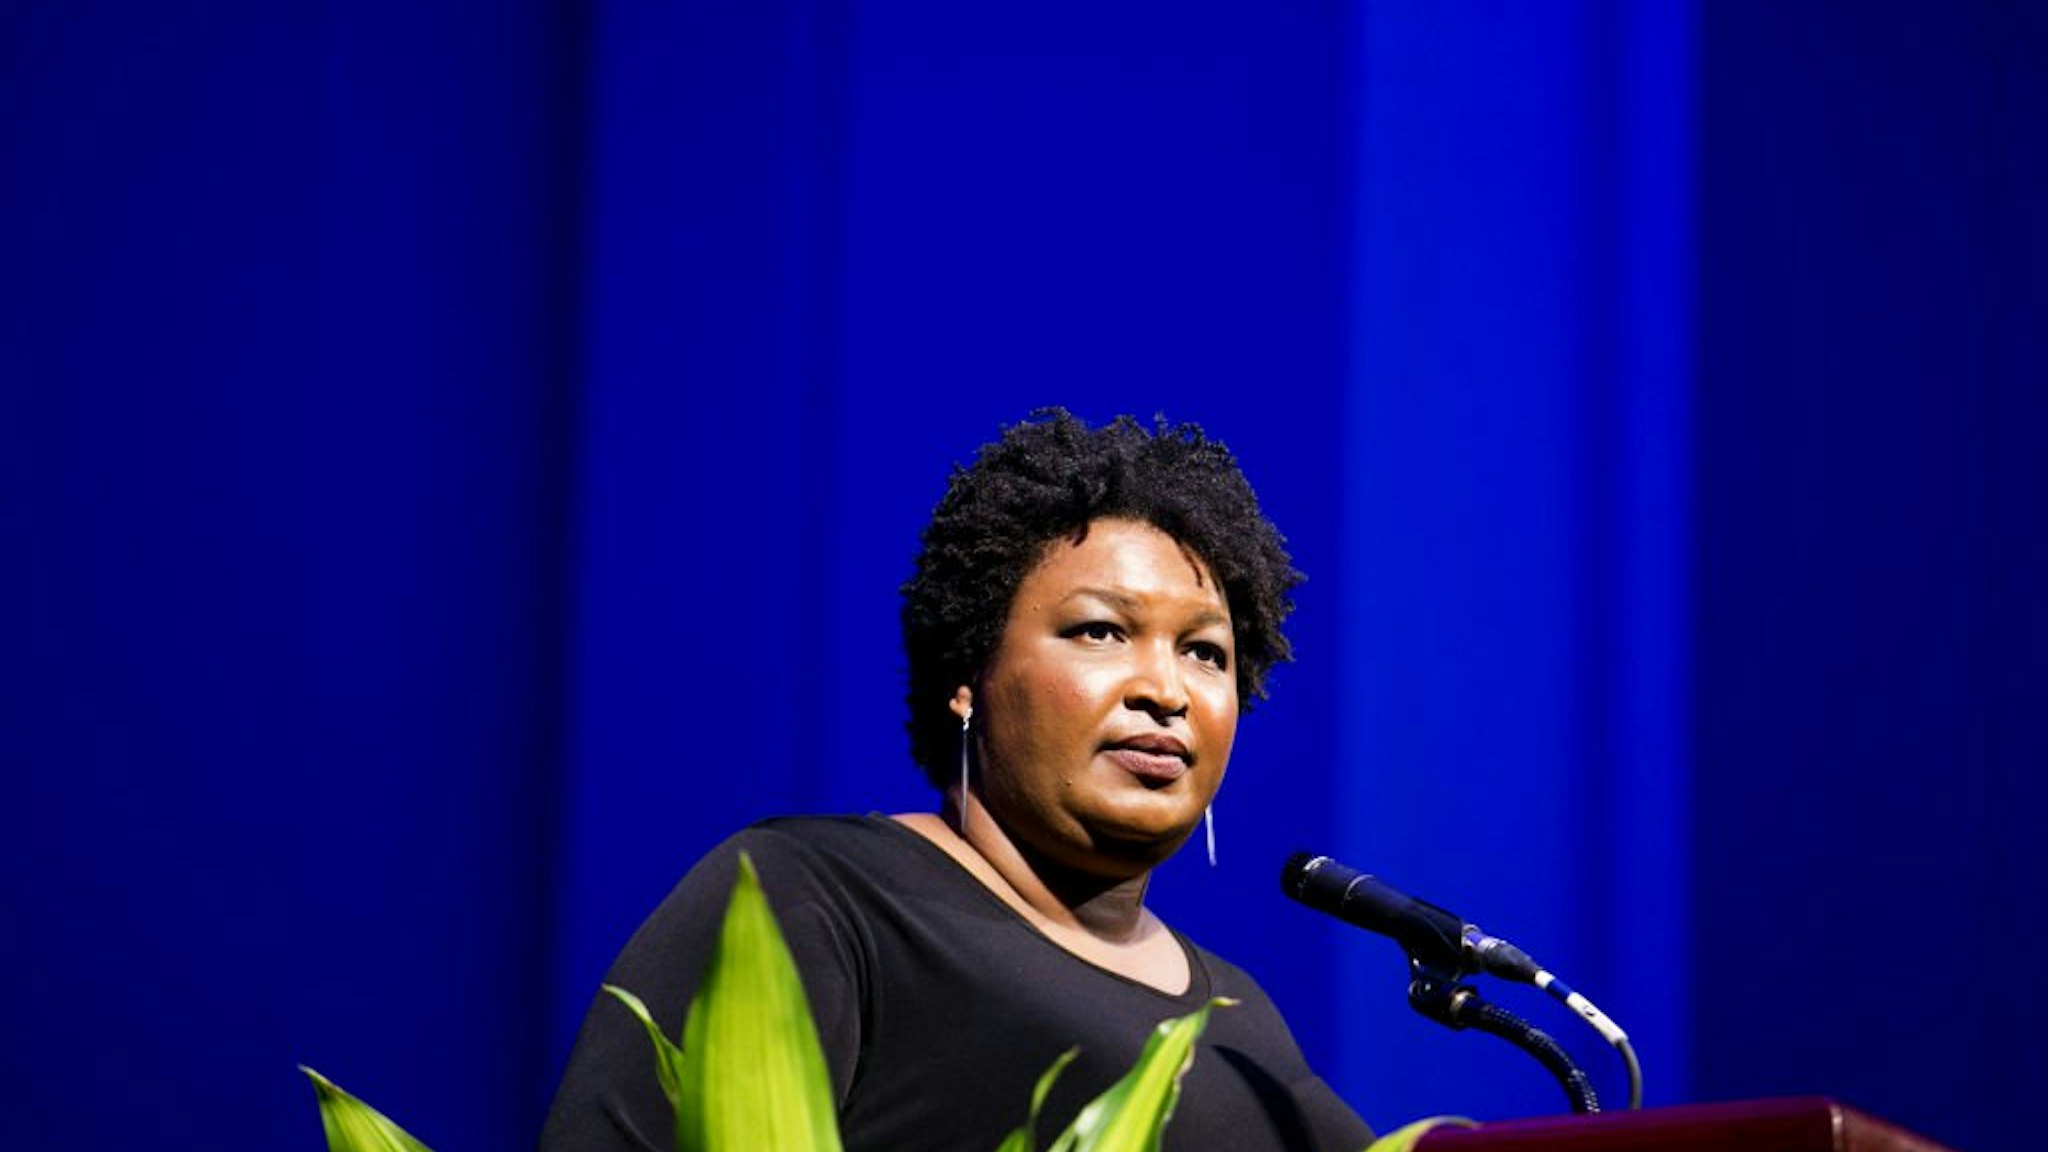 Stacey Abrams pauses while speaking during the 110th NAACP Annual Convention in Detroit, Michigan